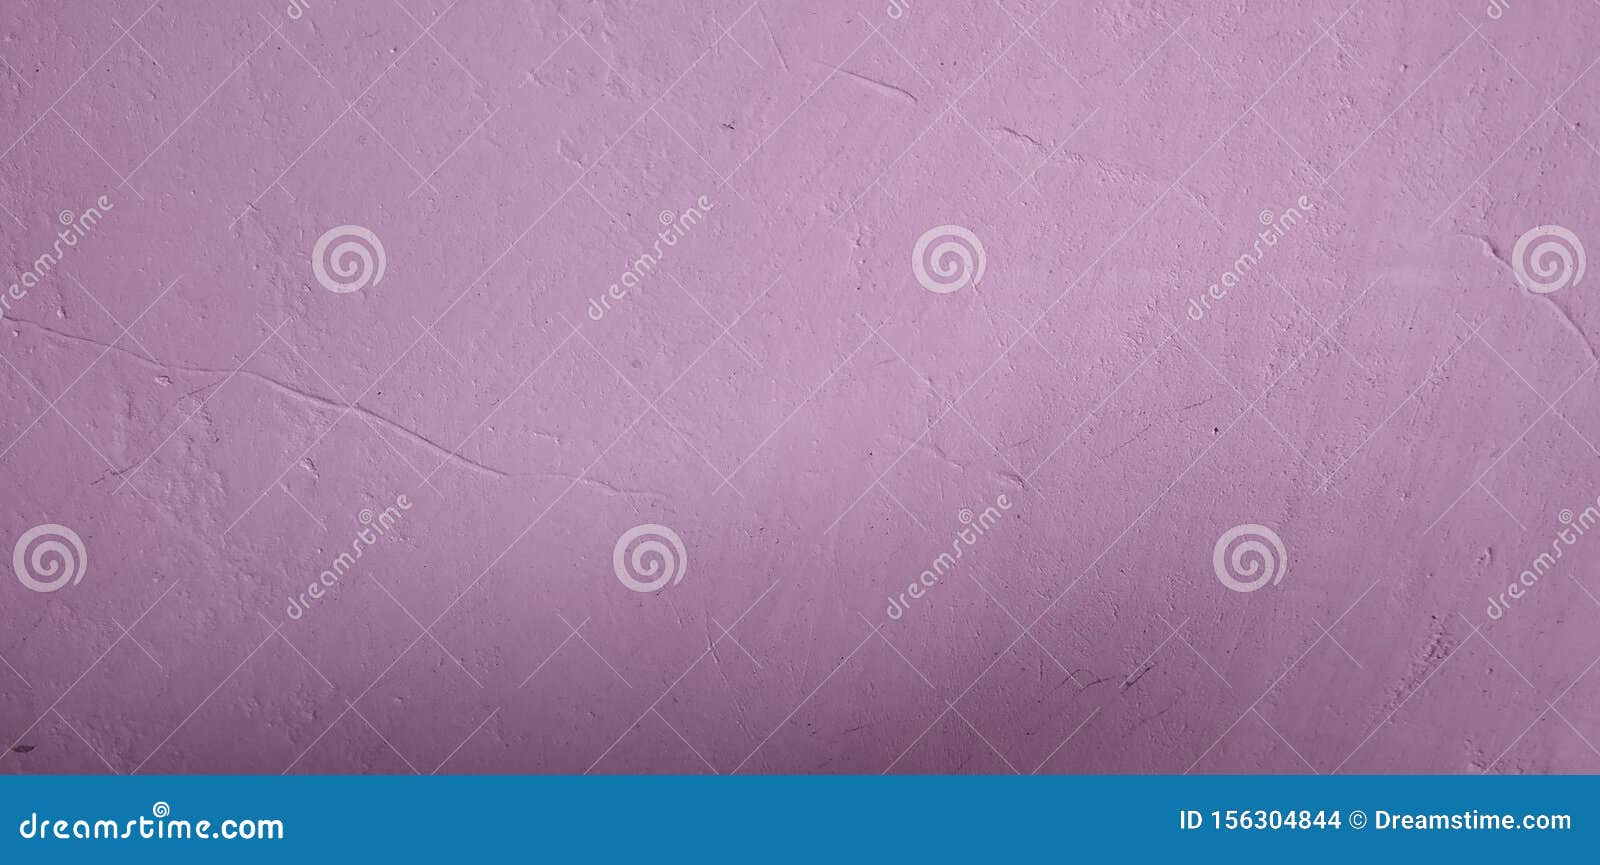 It Is A Natural Pink Background Stock Photo Image Of Background Painting 156304844